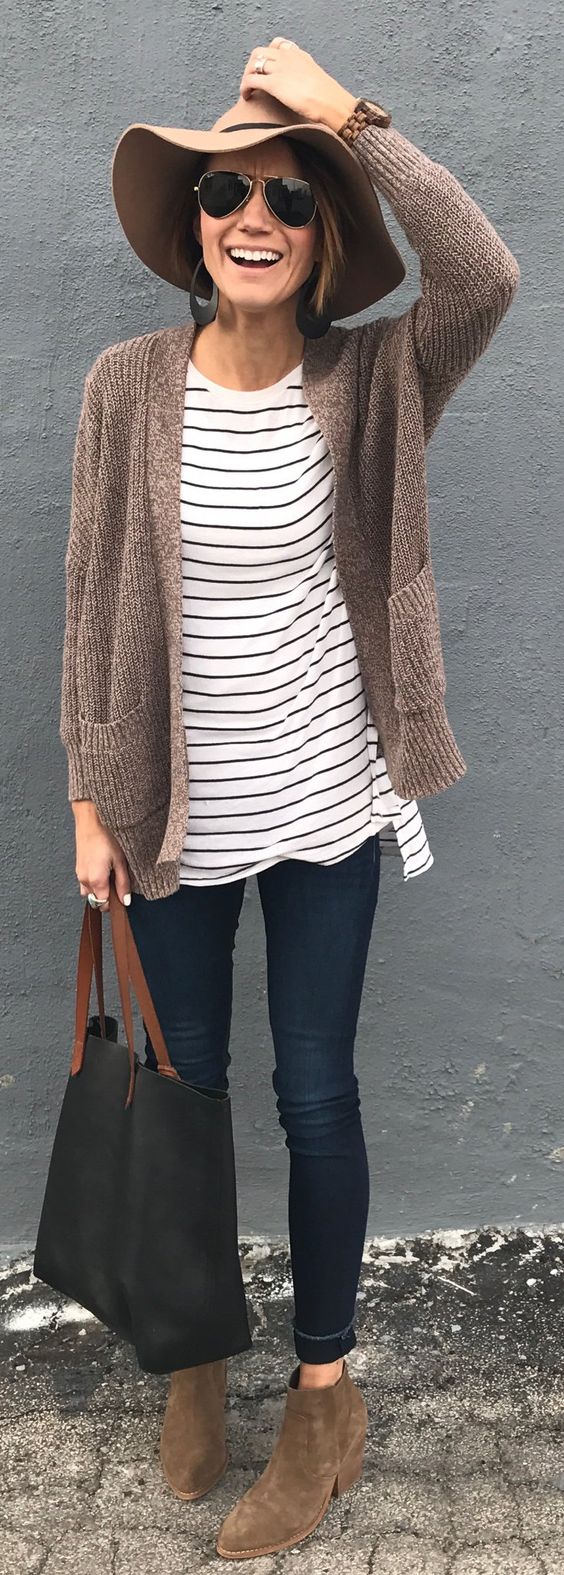 outfit of the day | stripped top + knit cardi + bag + jeans + boots